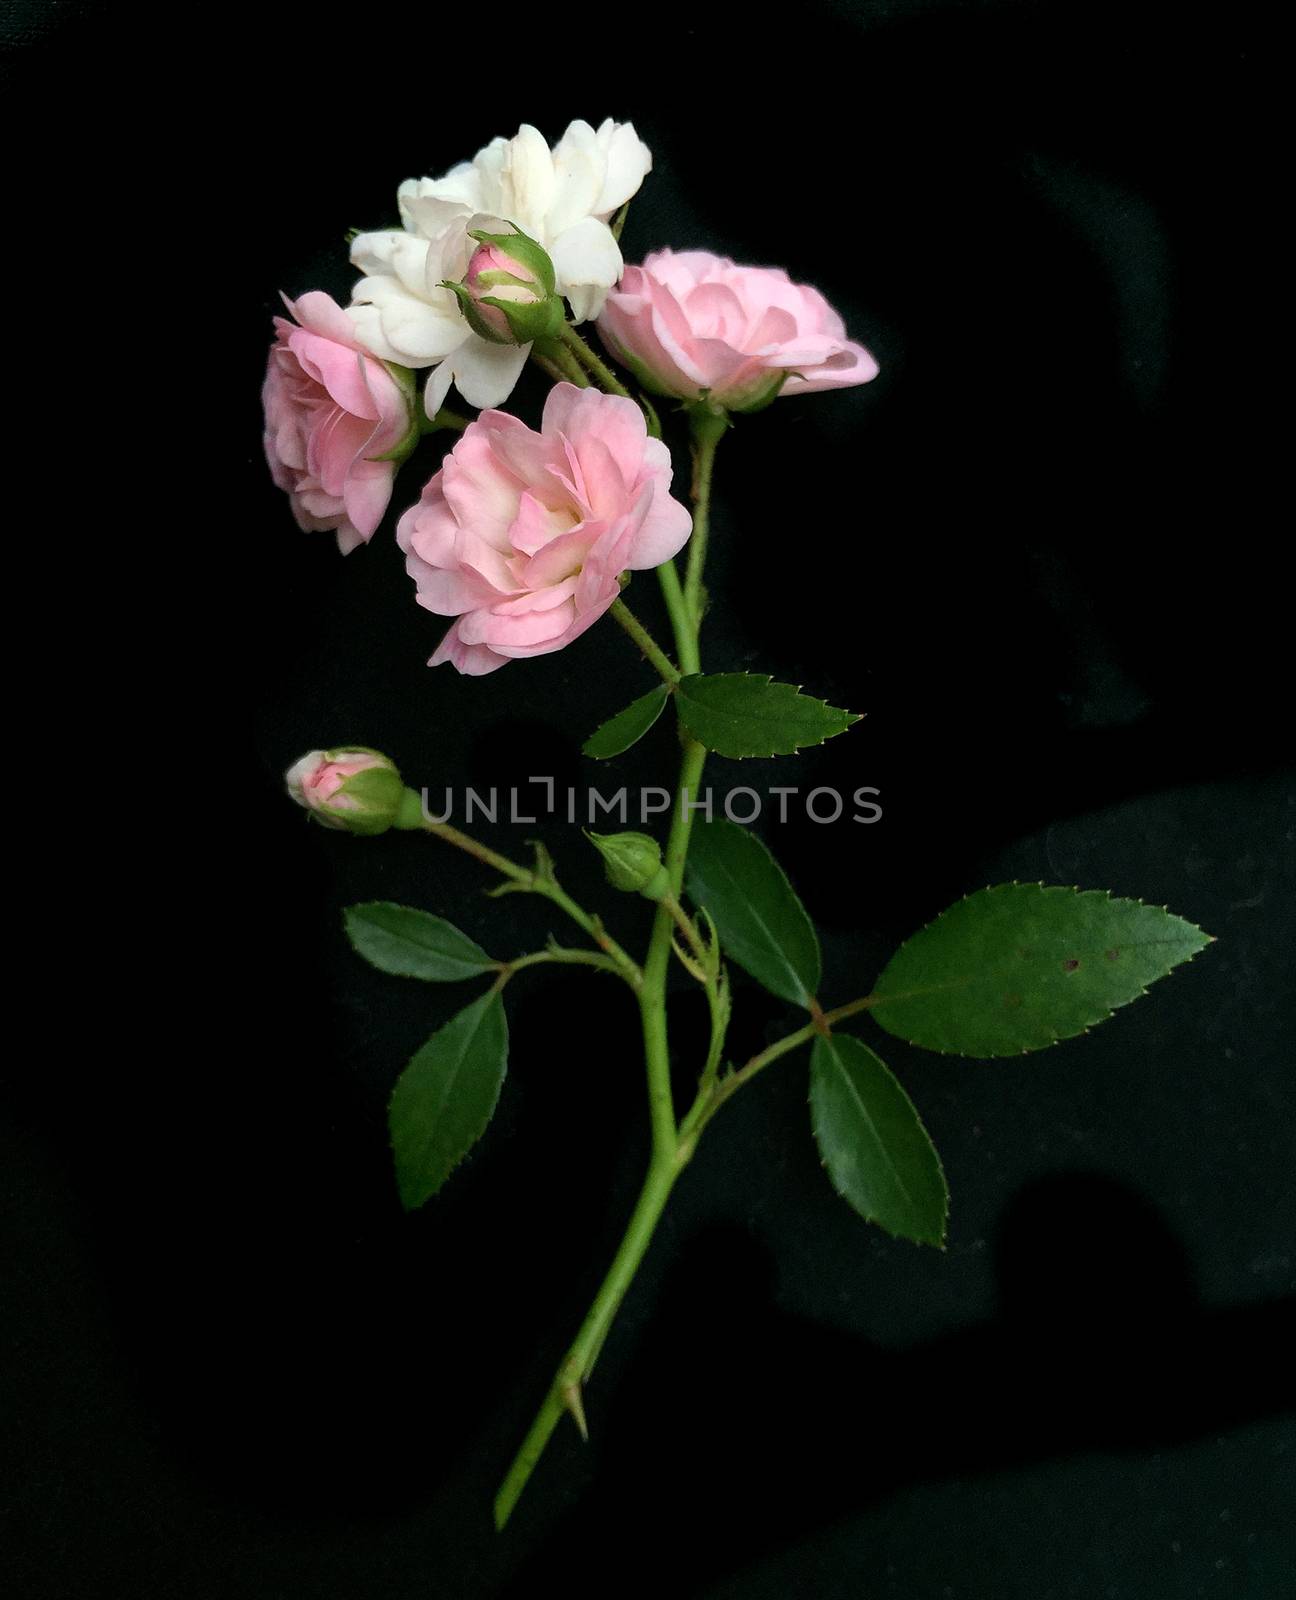 Rose on a black background. by ohhlanla